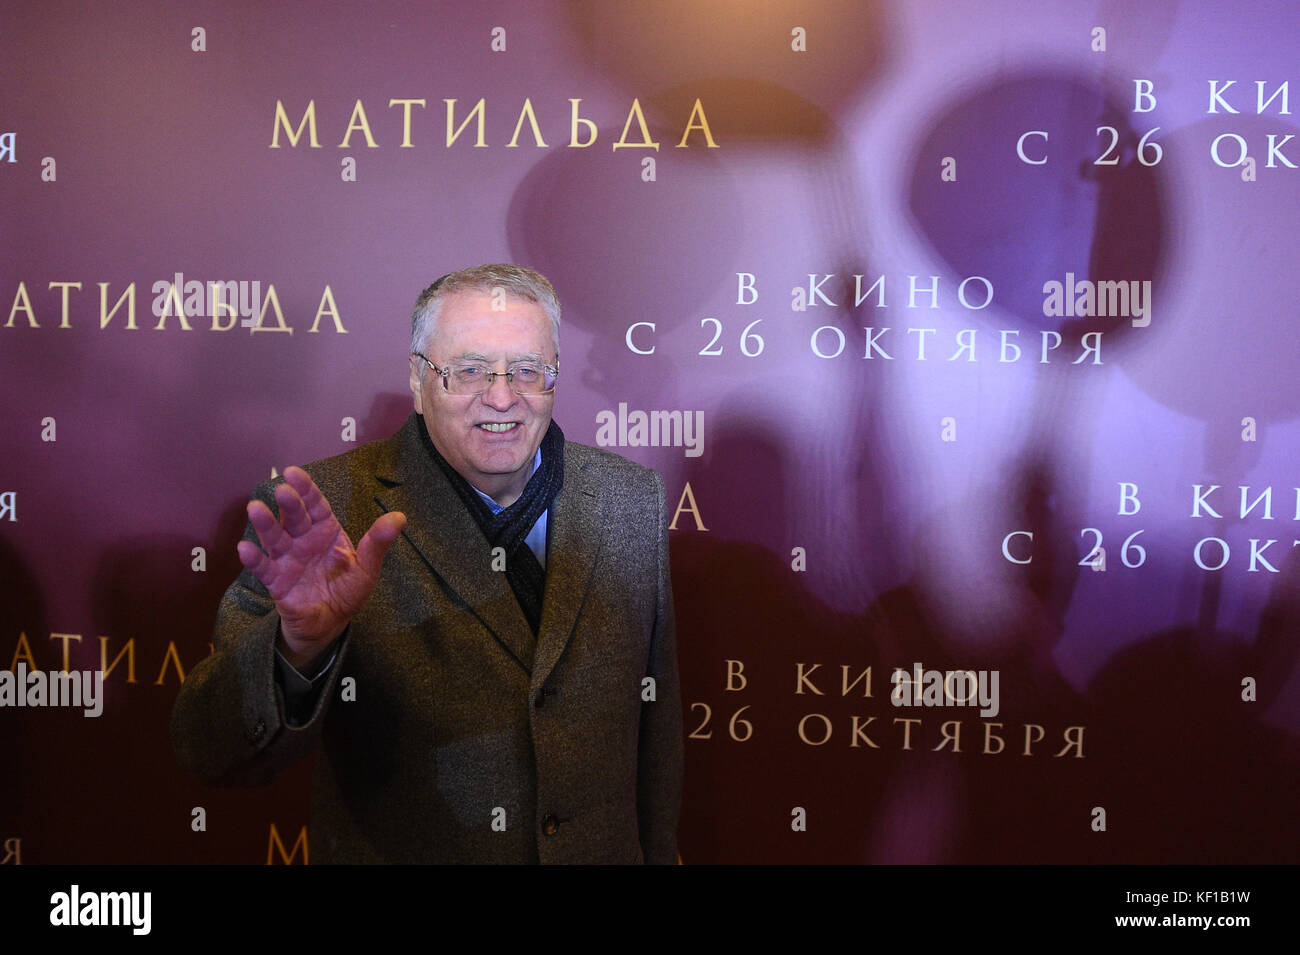 Moscow, Russia. 24th Oct, 2017. Premiere of Aleksey Uchitel's film 'Matilda' at 'Oktyabr' cinema. In picture: Liberal Democratic Party leader Vladimir Zhirinovsky. Credit: Russian Look Ltd./Alamy Live News Stock Photo